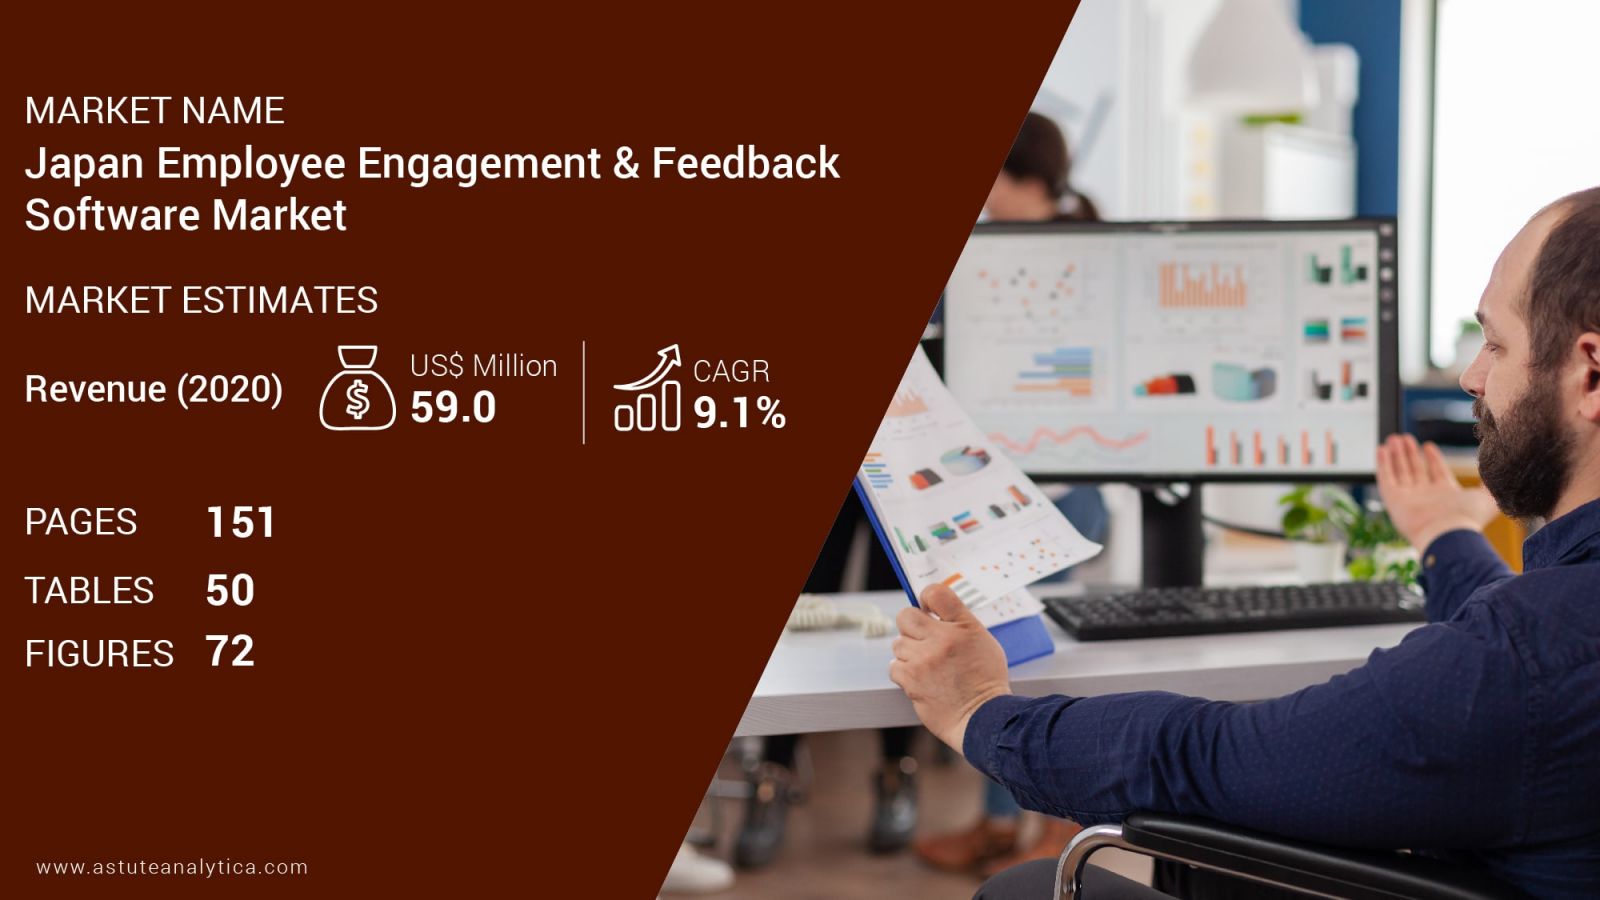 Japan employee engagement and feedback software market scope